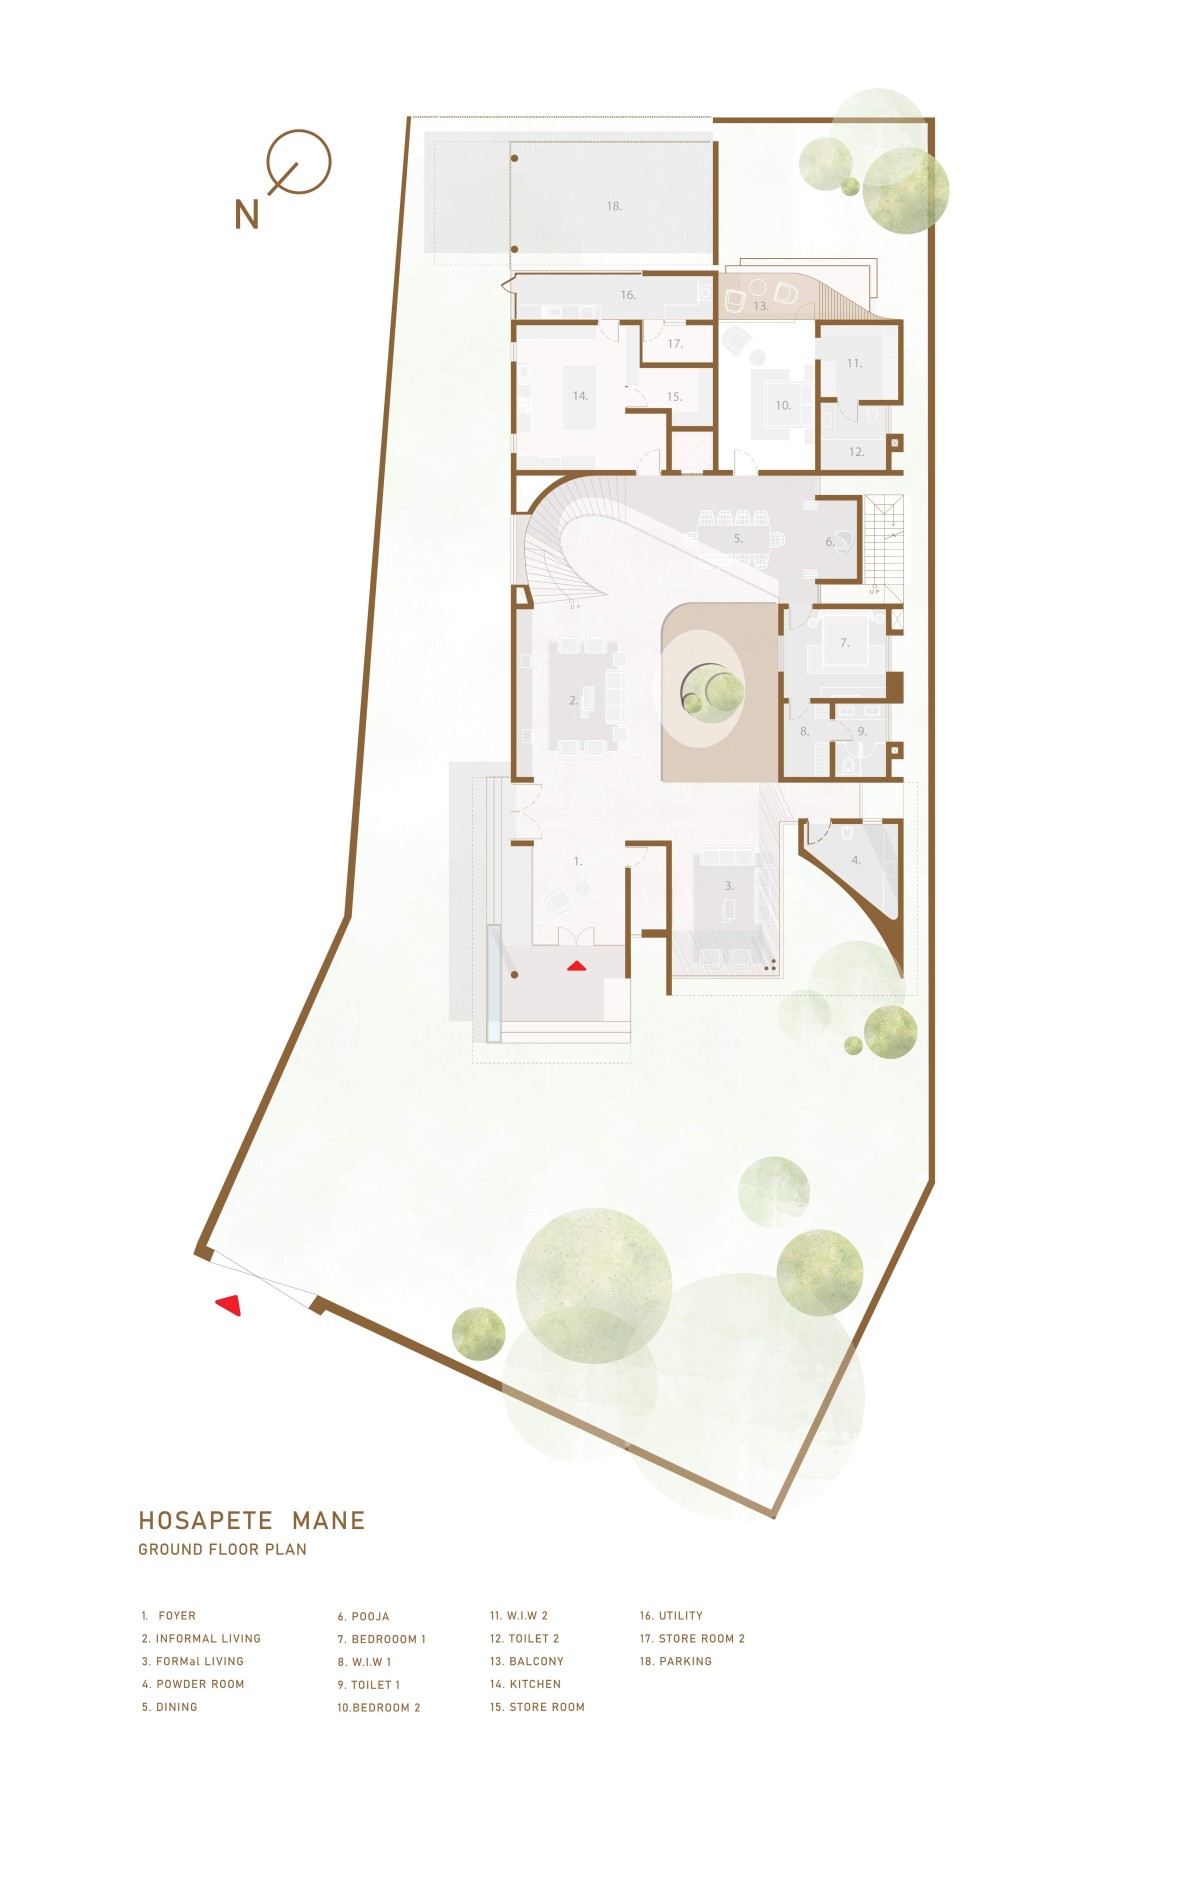 Ground floor plan of Hosapete Mane by Cadence Architects